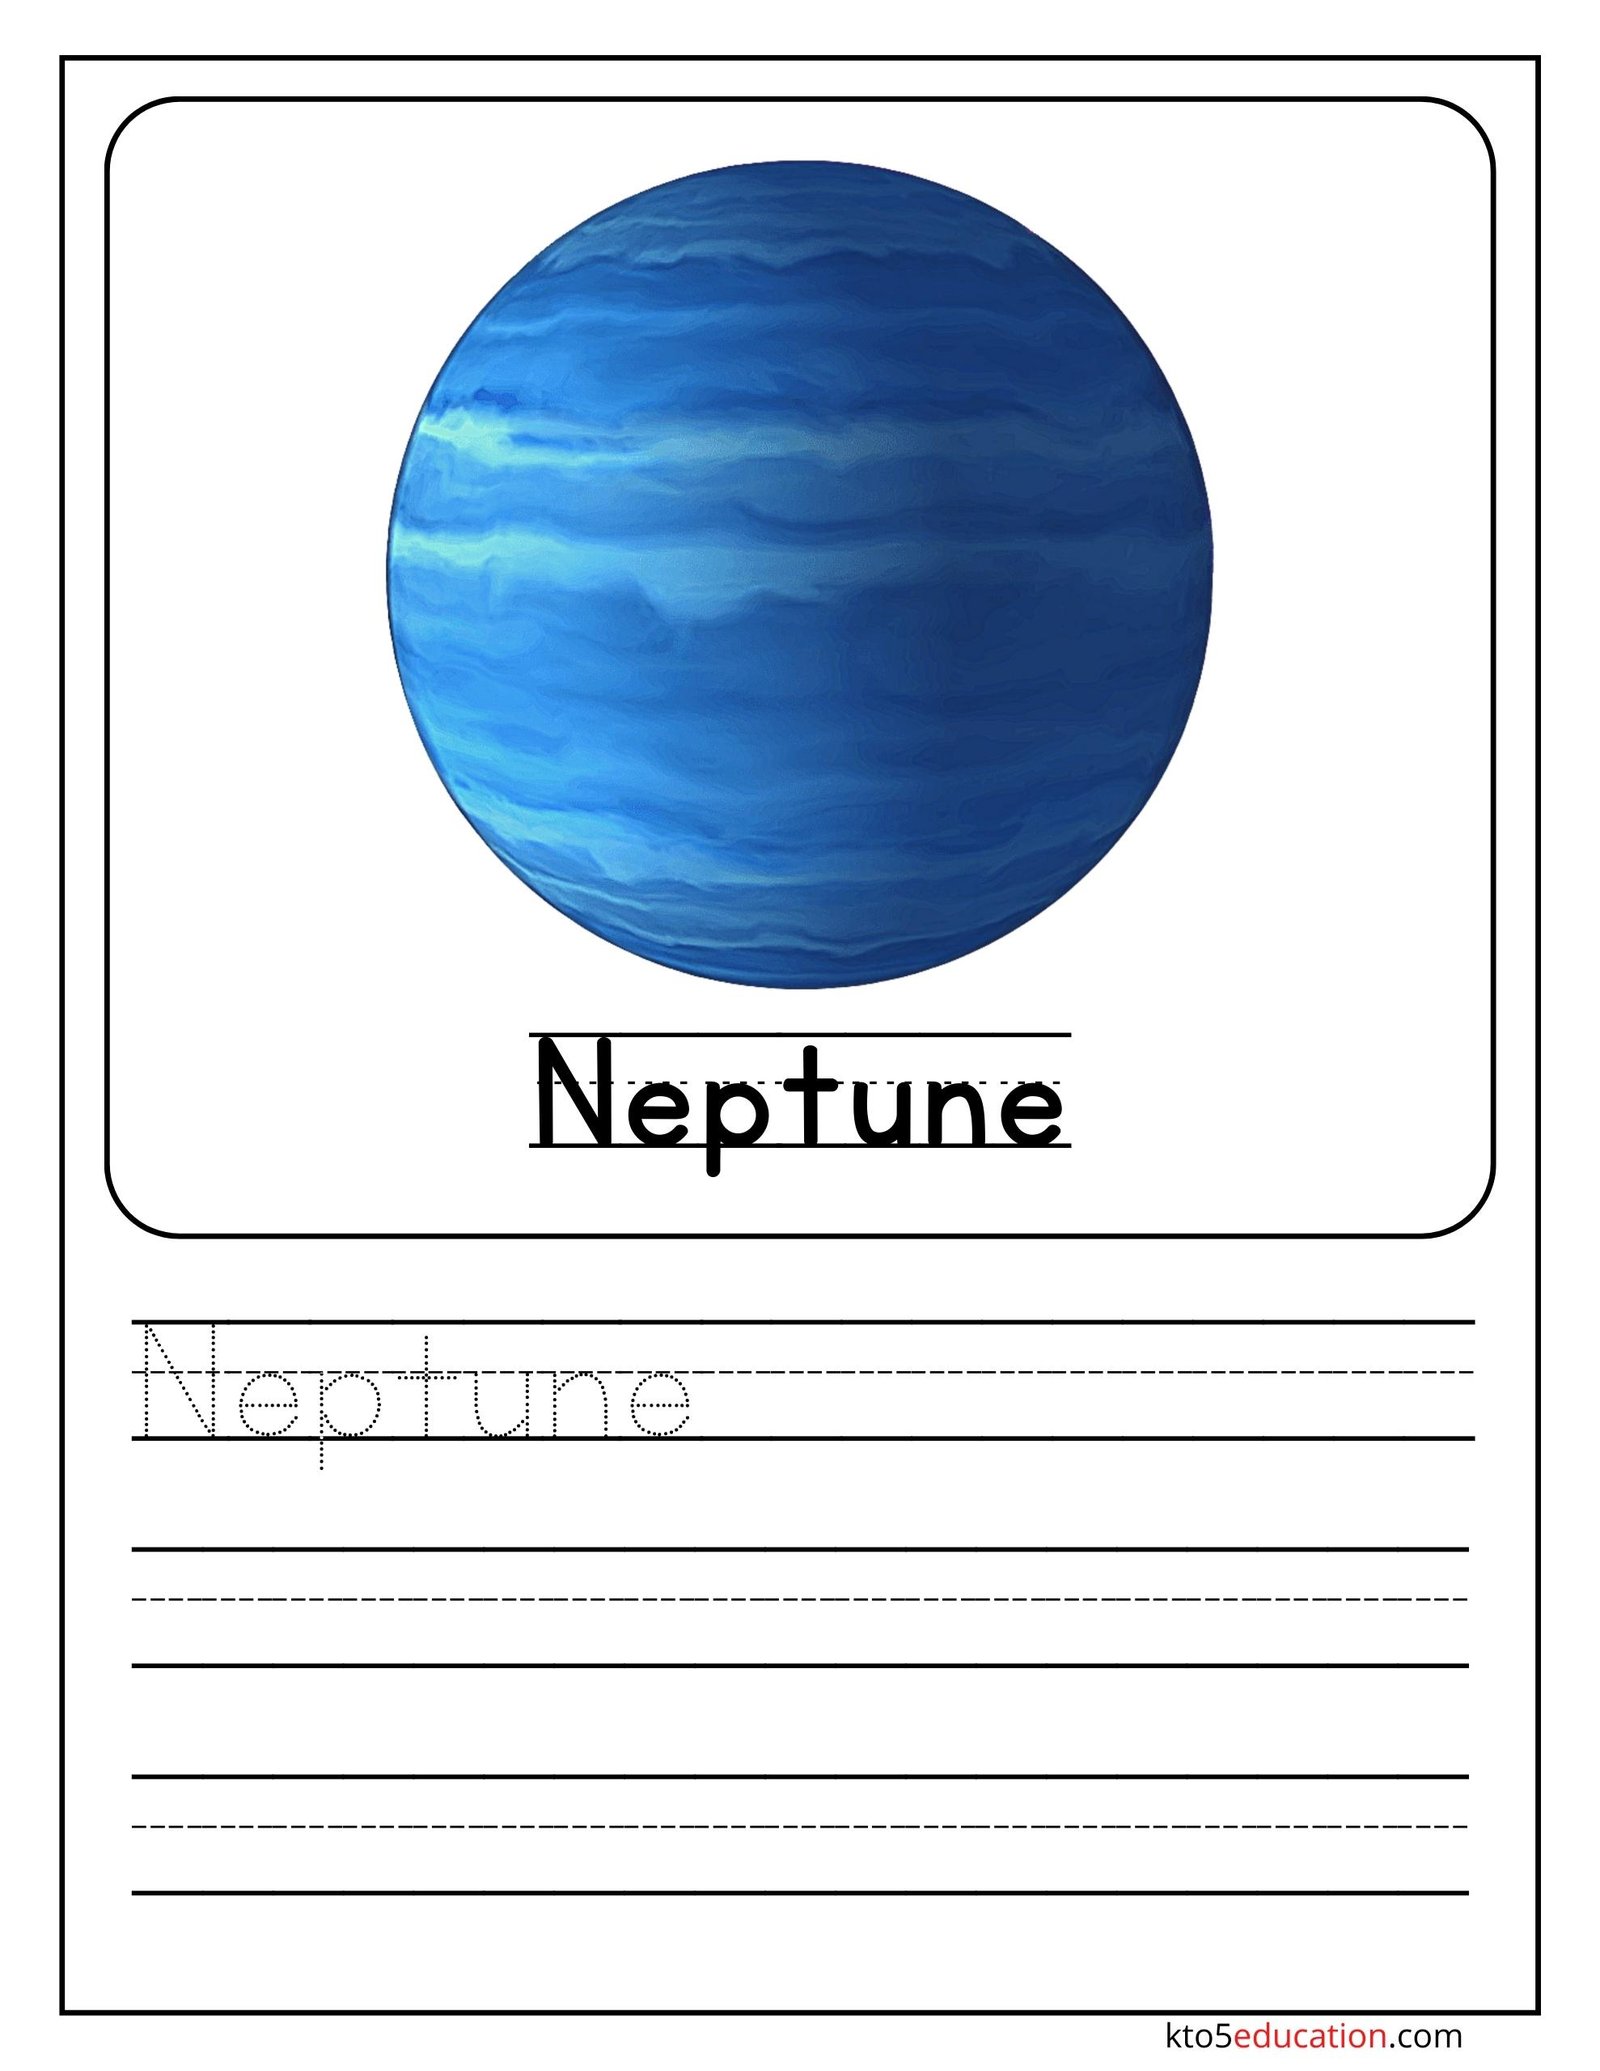 Neptune Planet Name Practice in French Language Worksheet